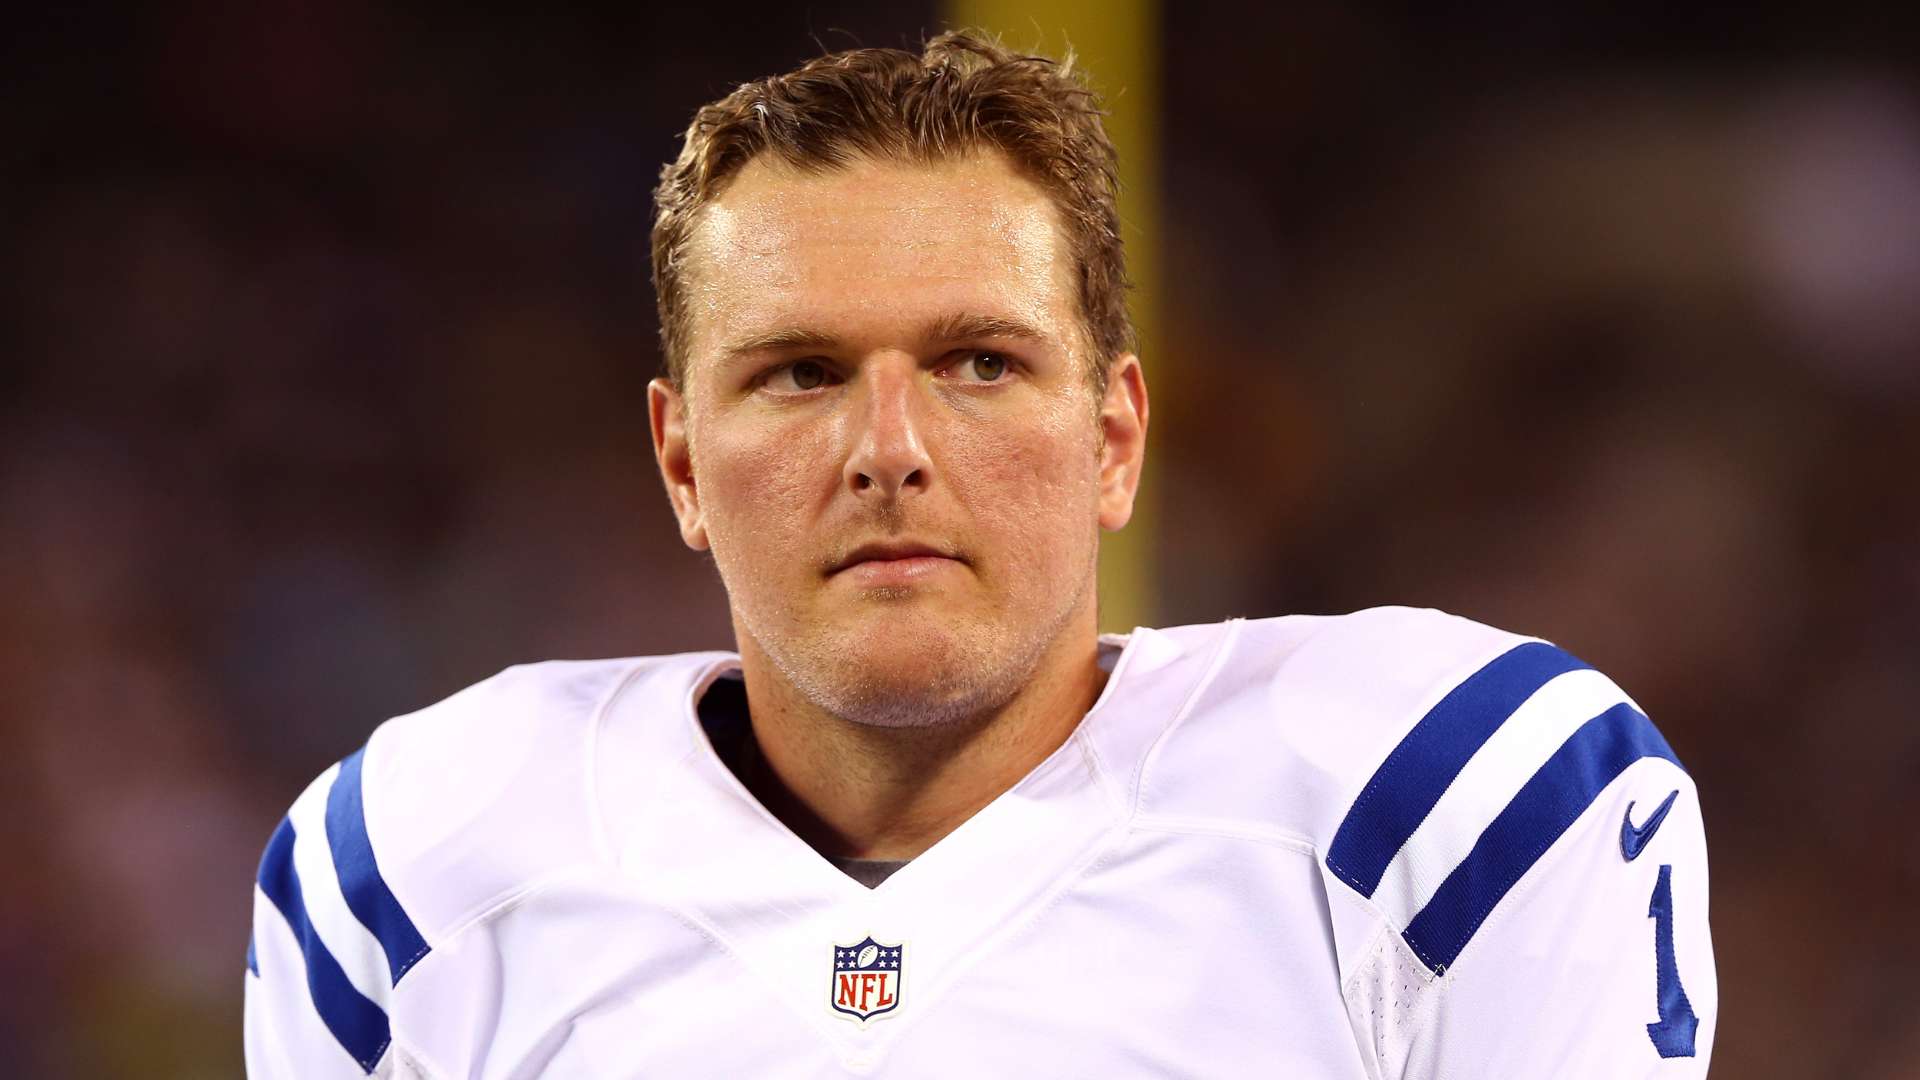 Punter Pat McAfee #1 of the Indianapolis Colts